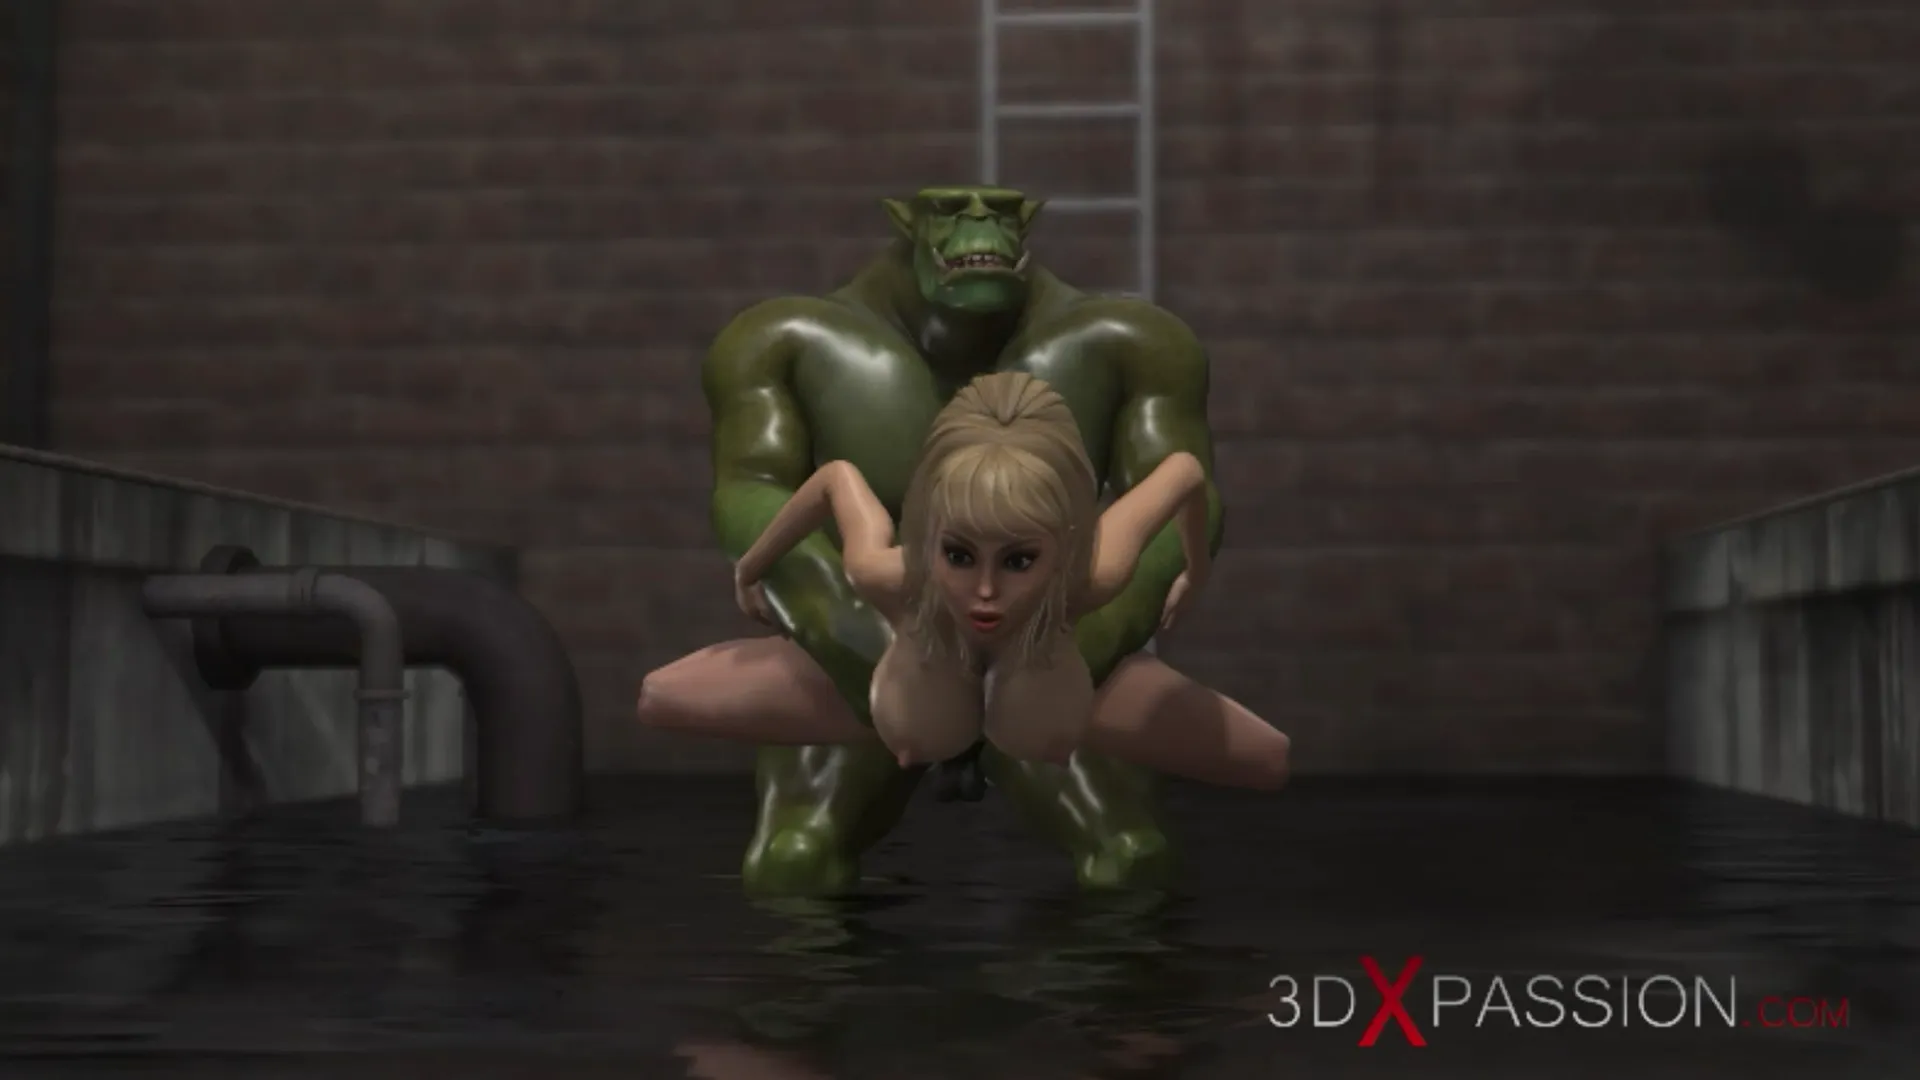 Horny hot girl standing fuck doggystyle green monster sewer